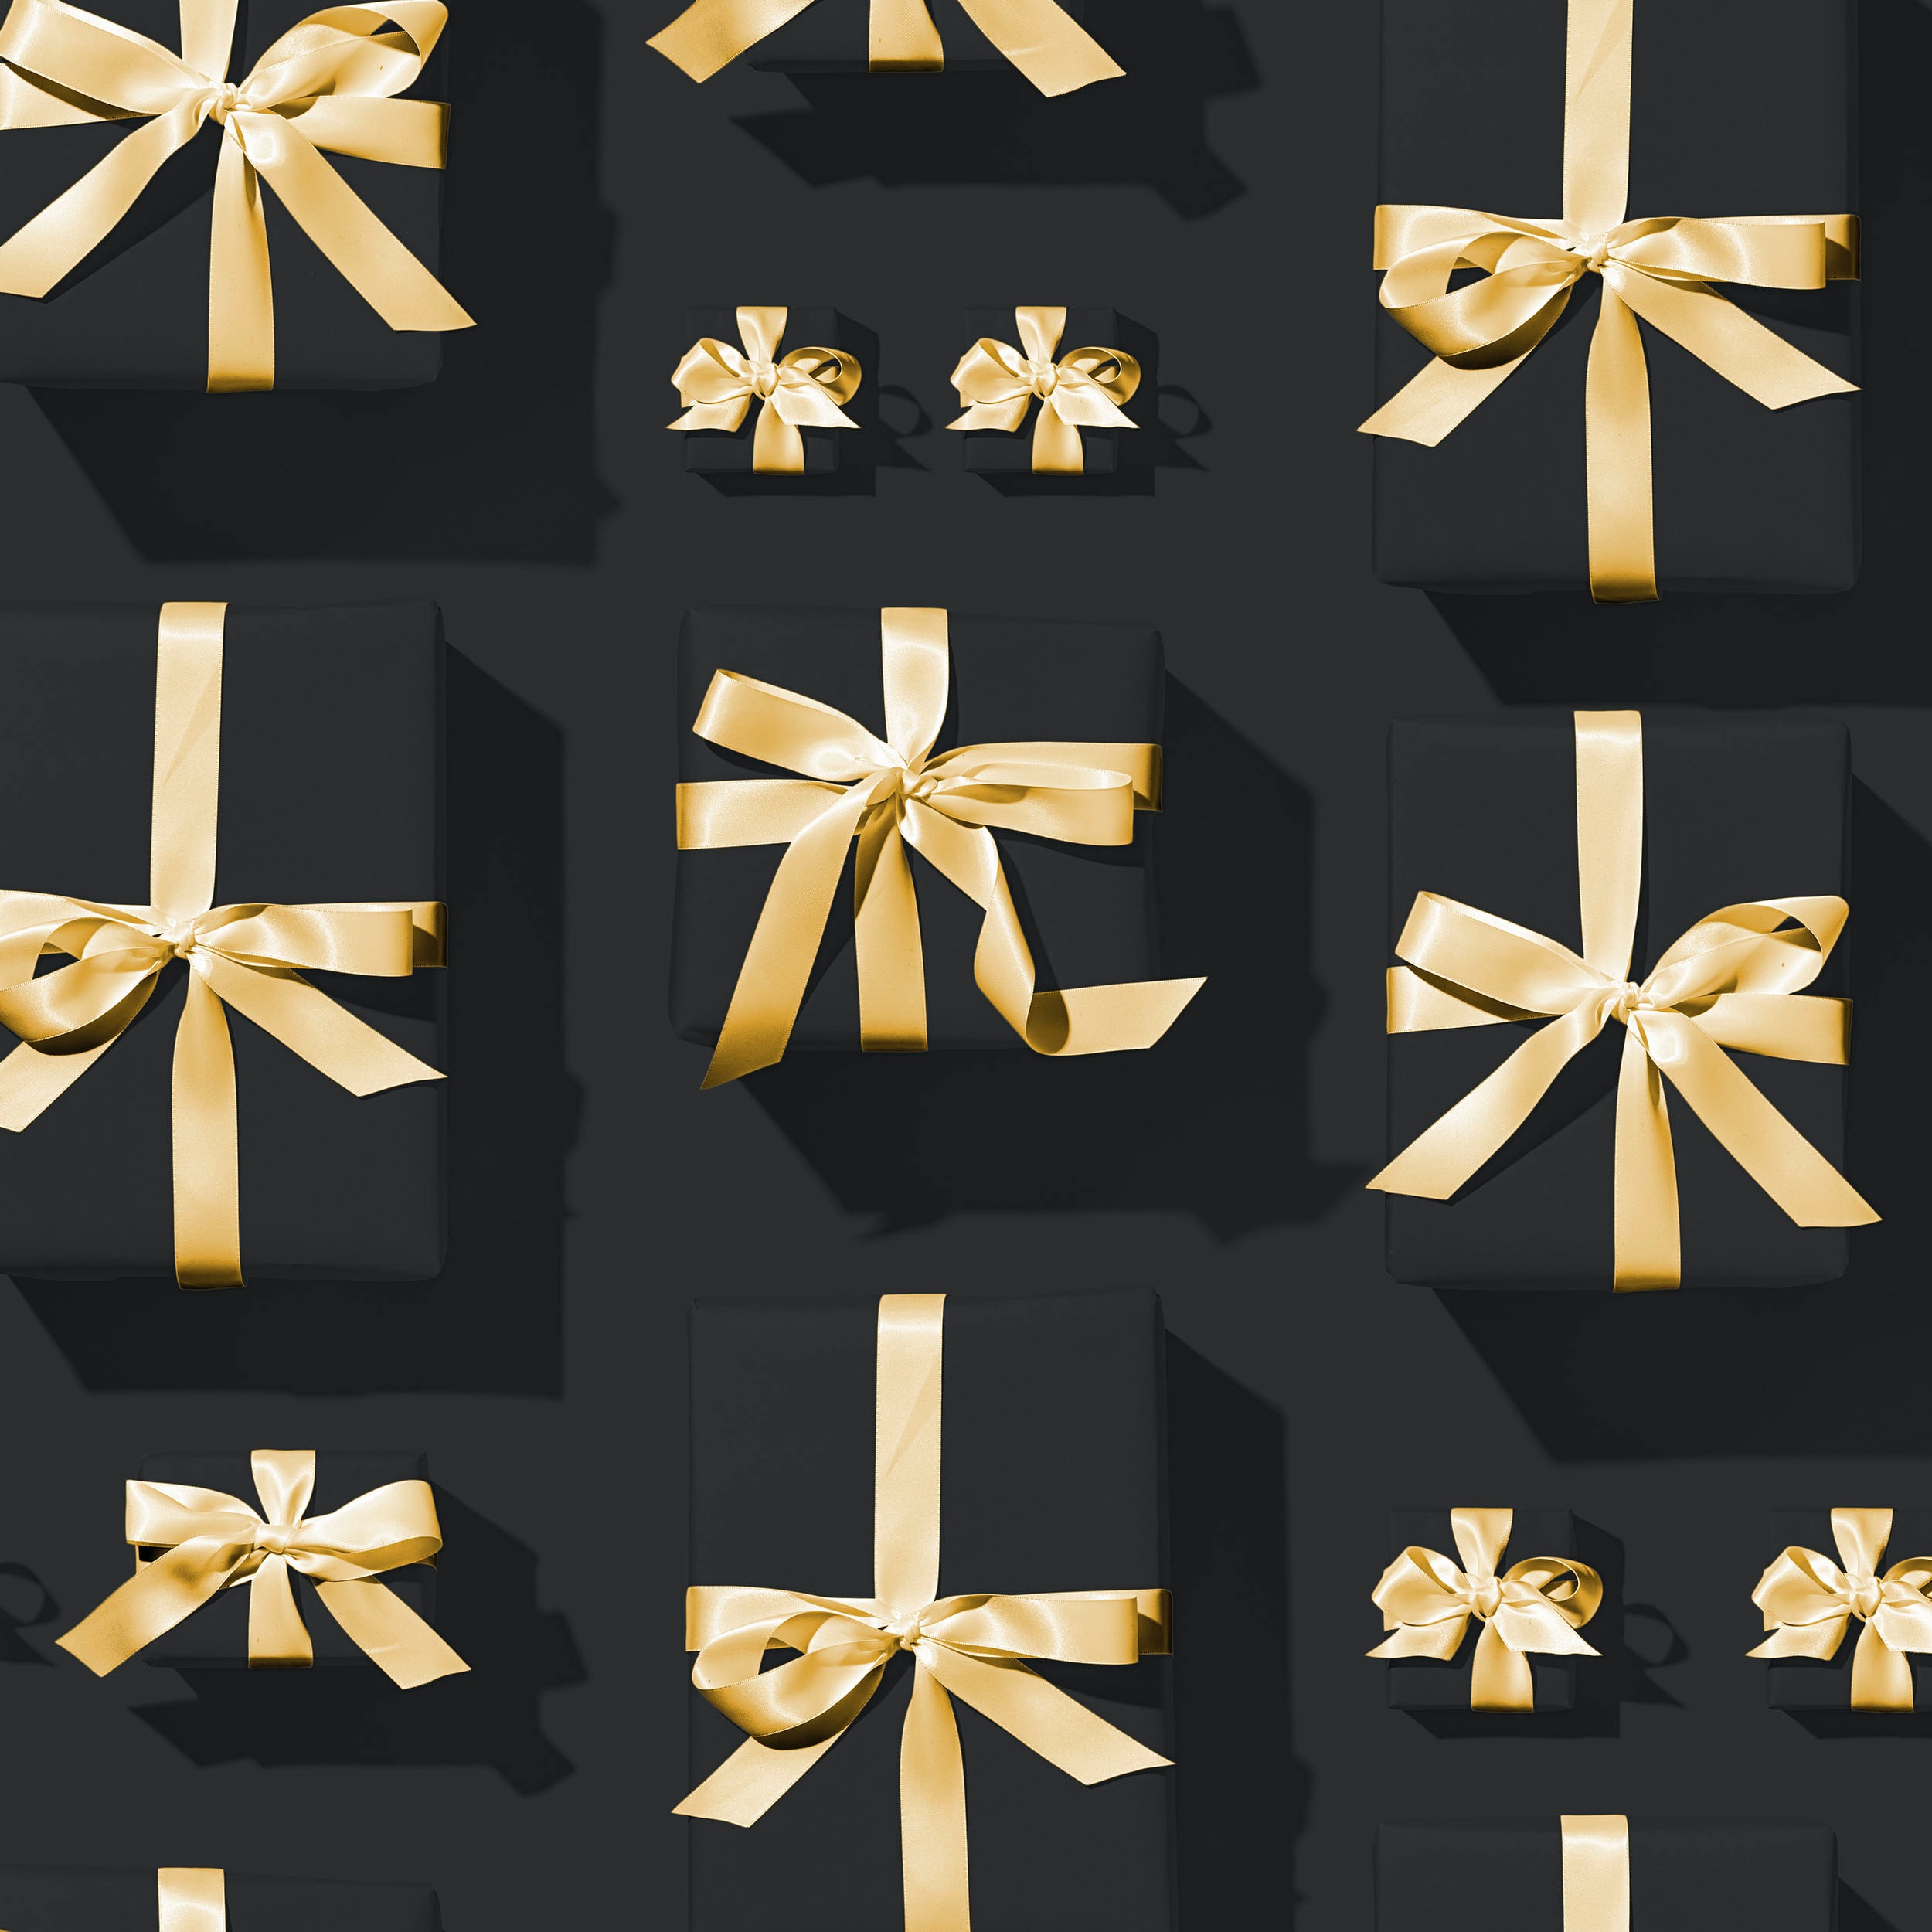 Many gift boxes are wrapped up in black.